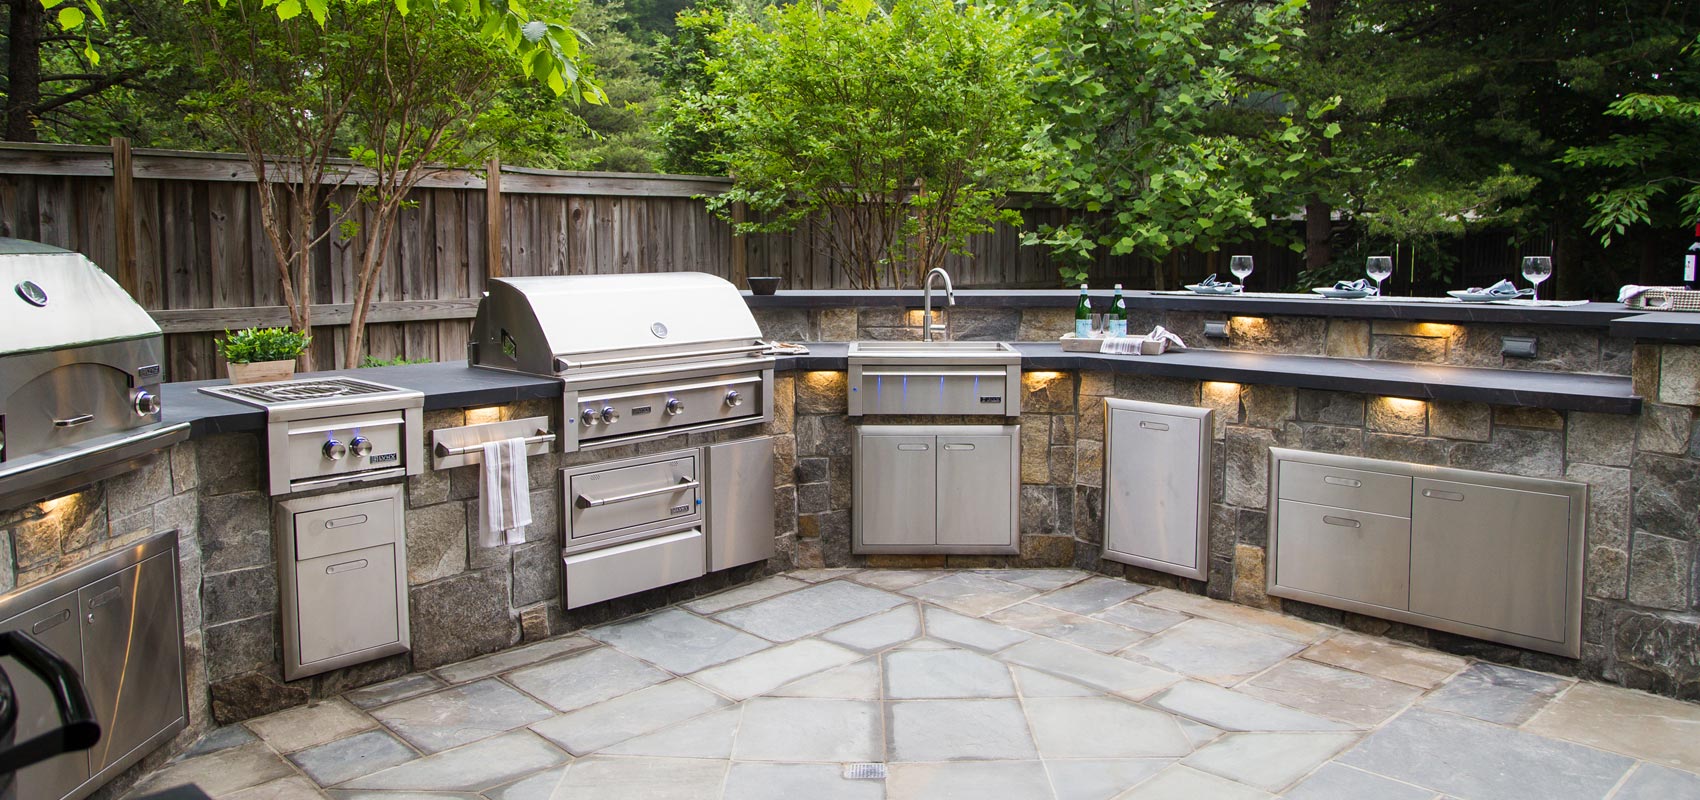 How to build an outdoor kitchen